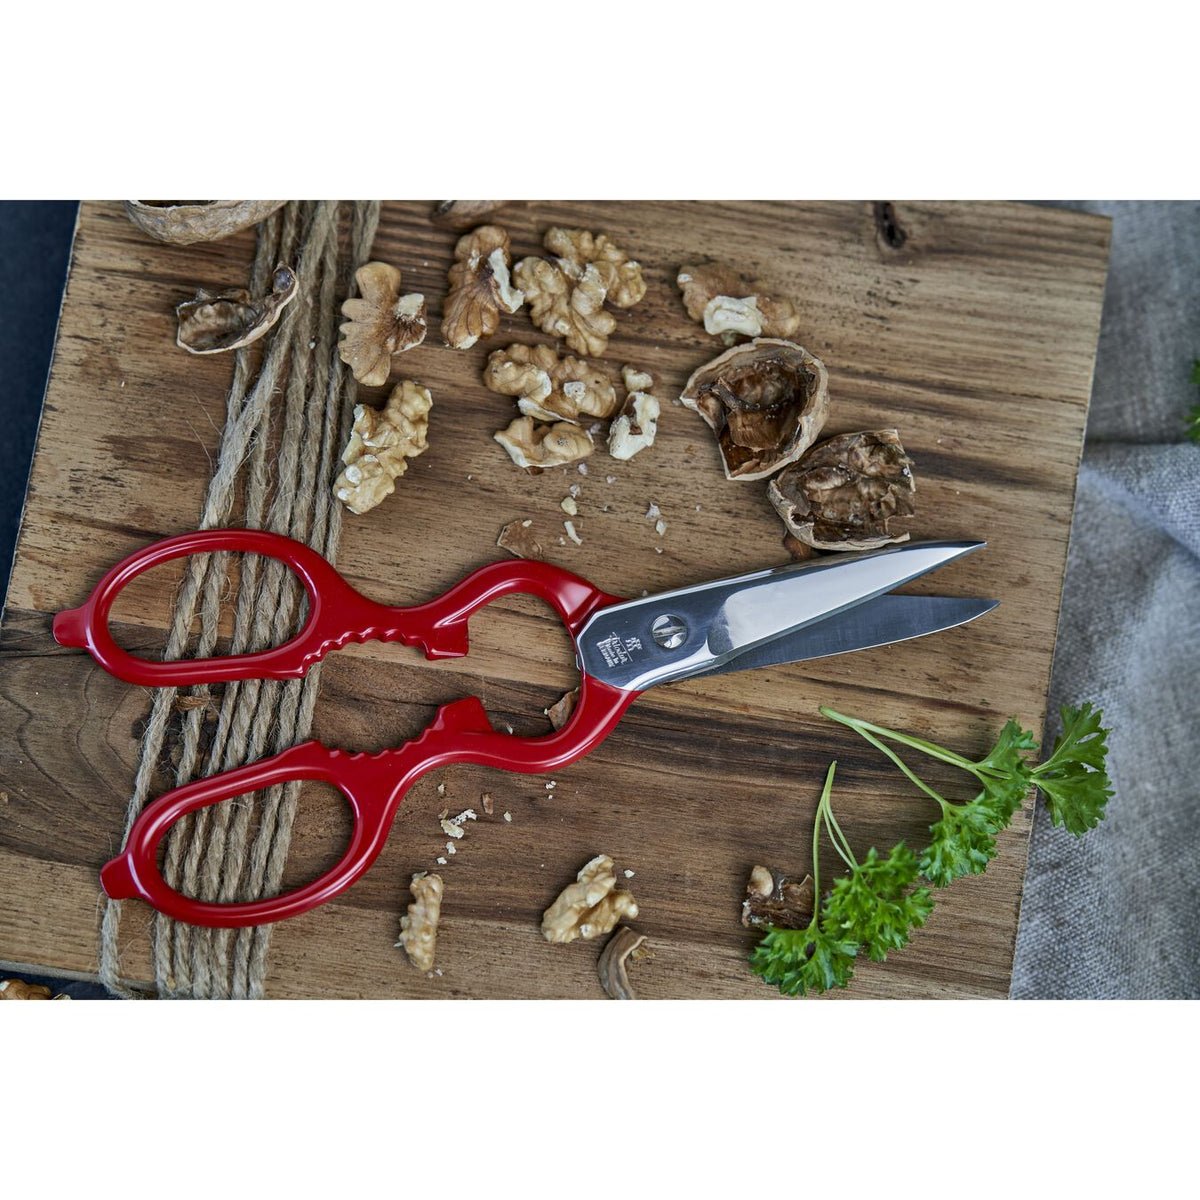 Every client is treated like family. Finding the ZWILLING SHEARS